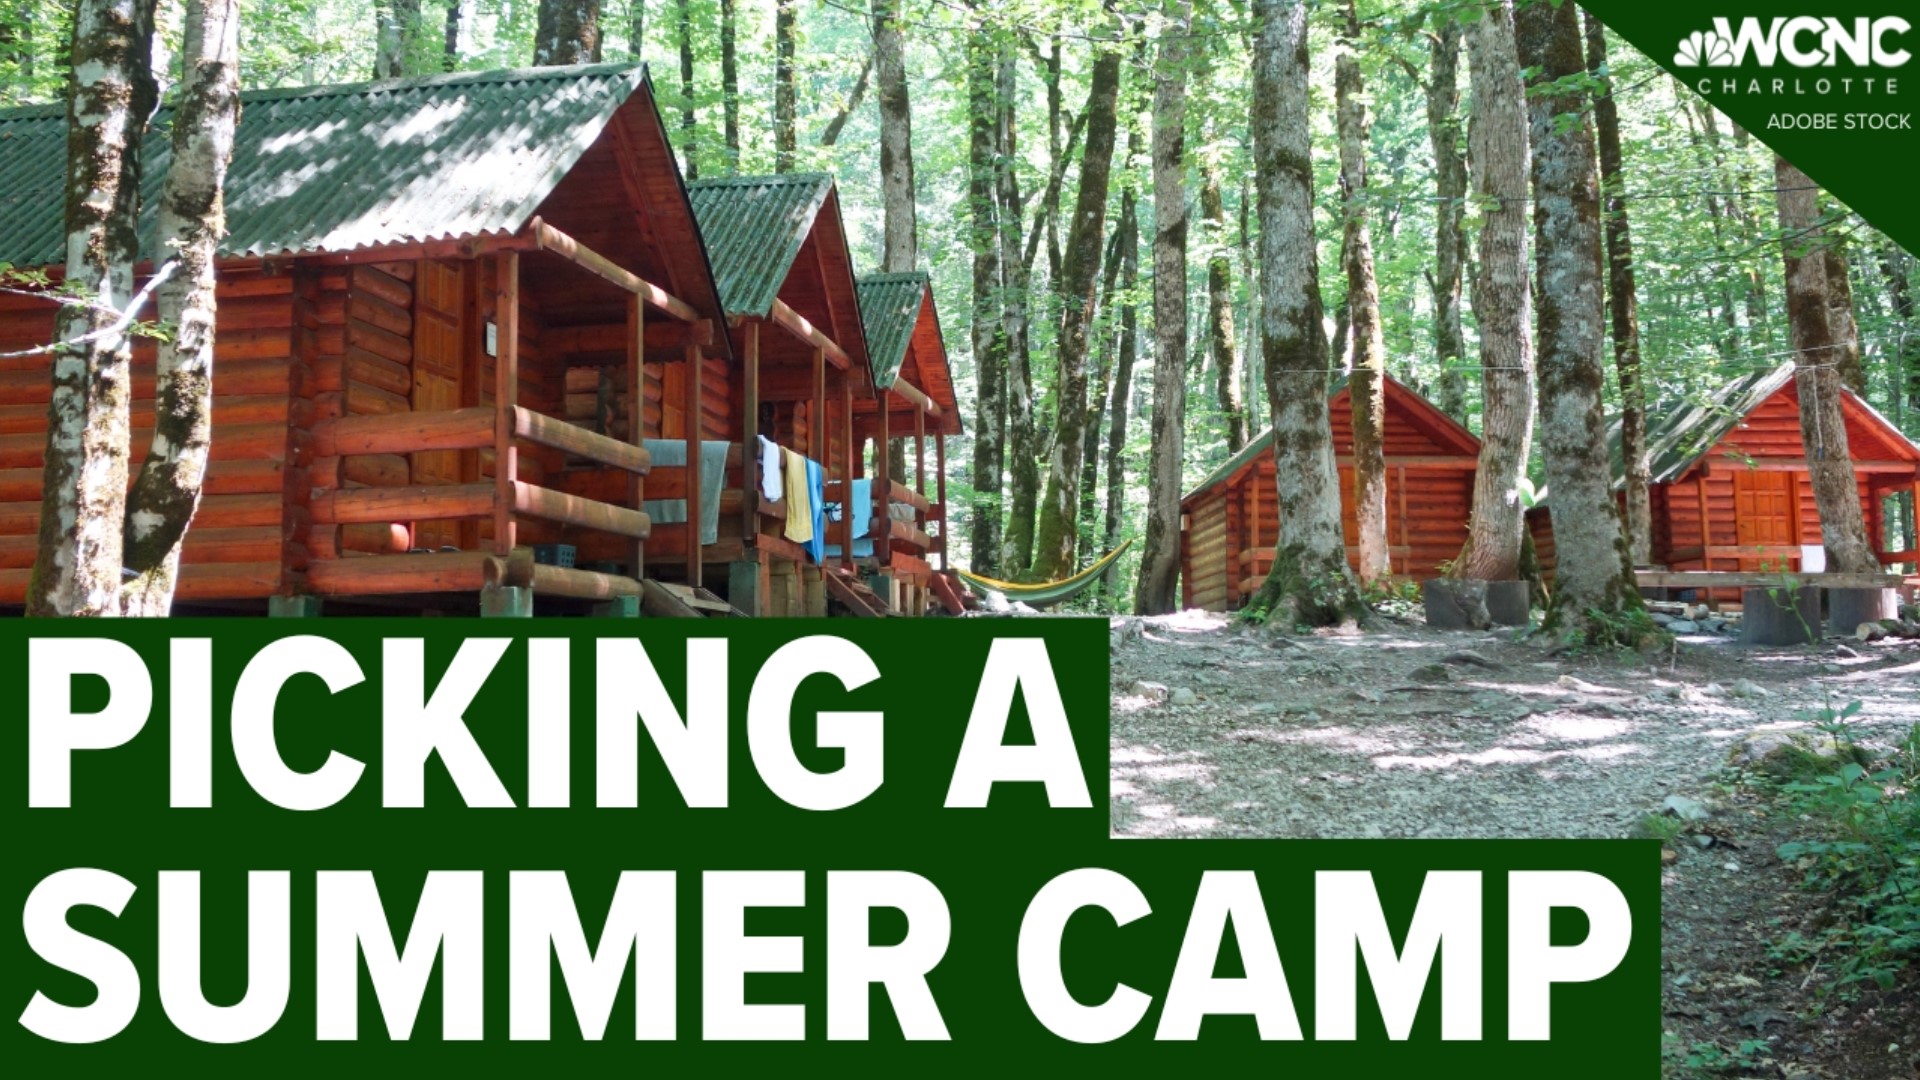 WCNC Charlotte's Carolyn Bruck shares information you need to know before selecting a summer camp for your kiddos.